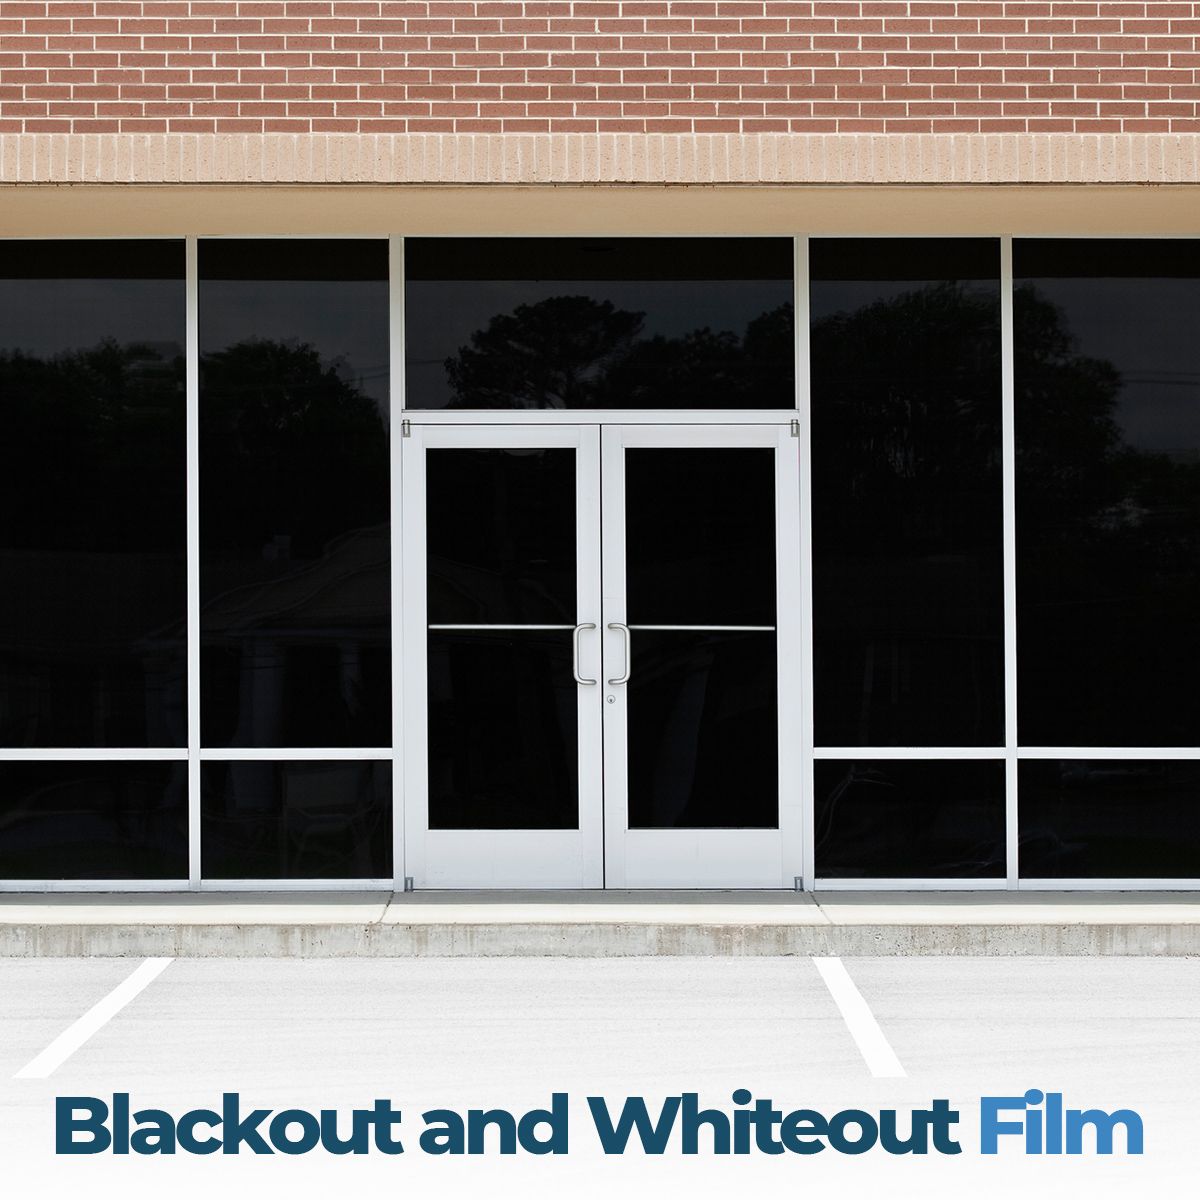 Blackout and Whiteout Film